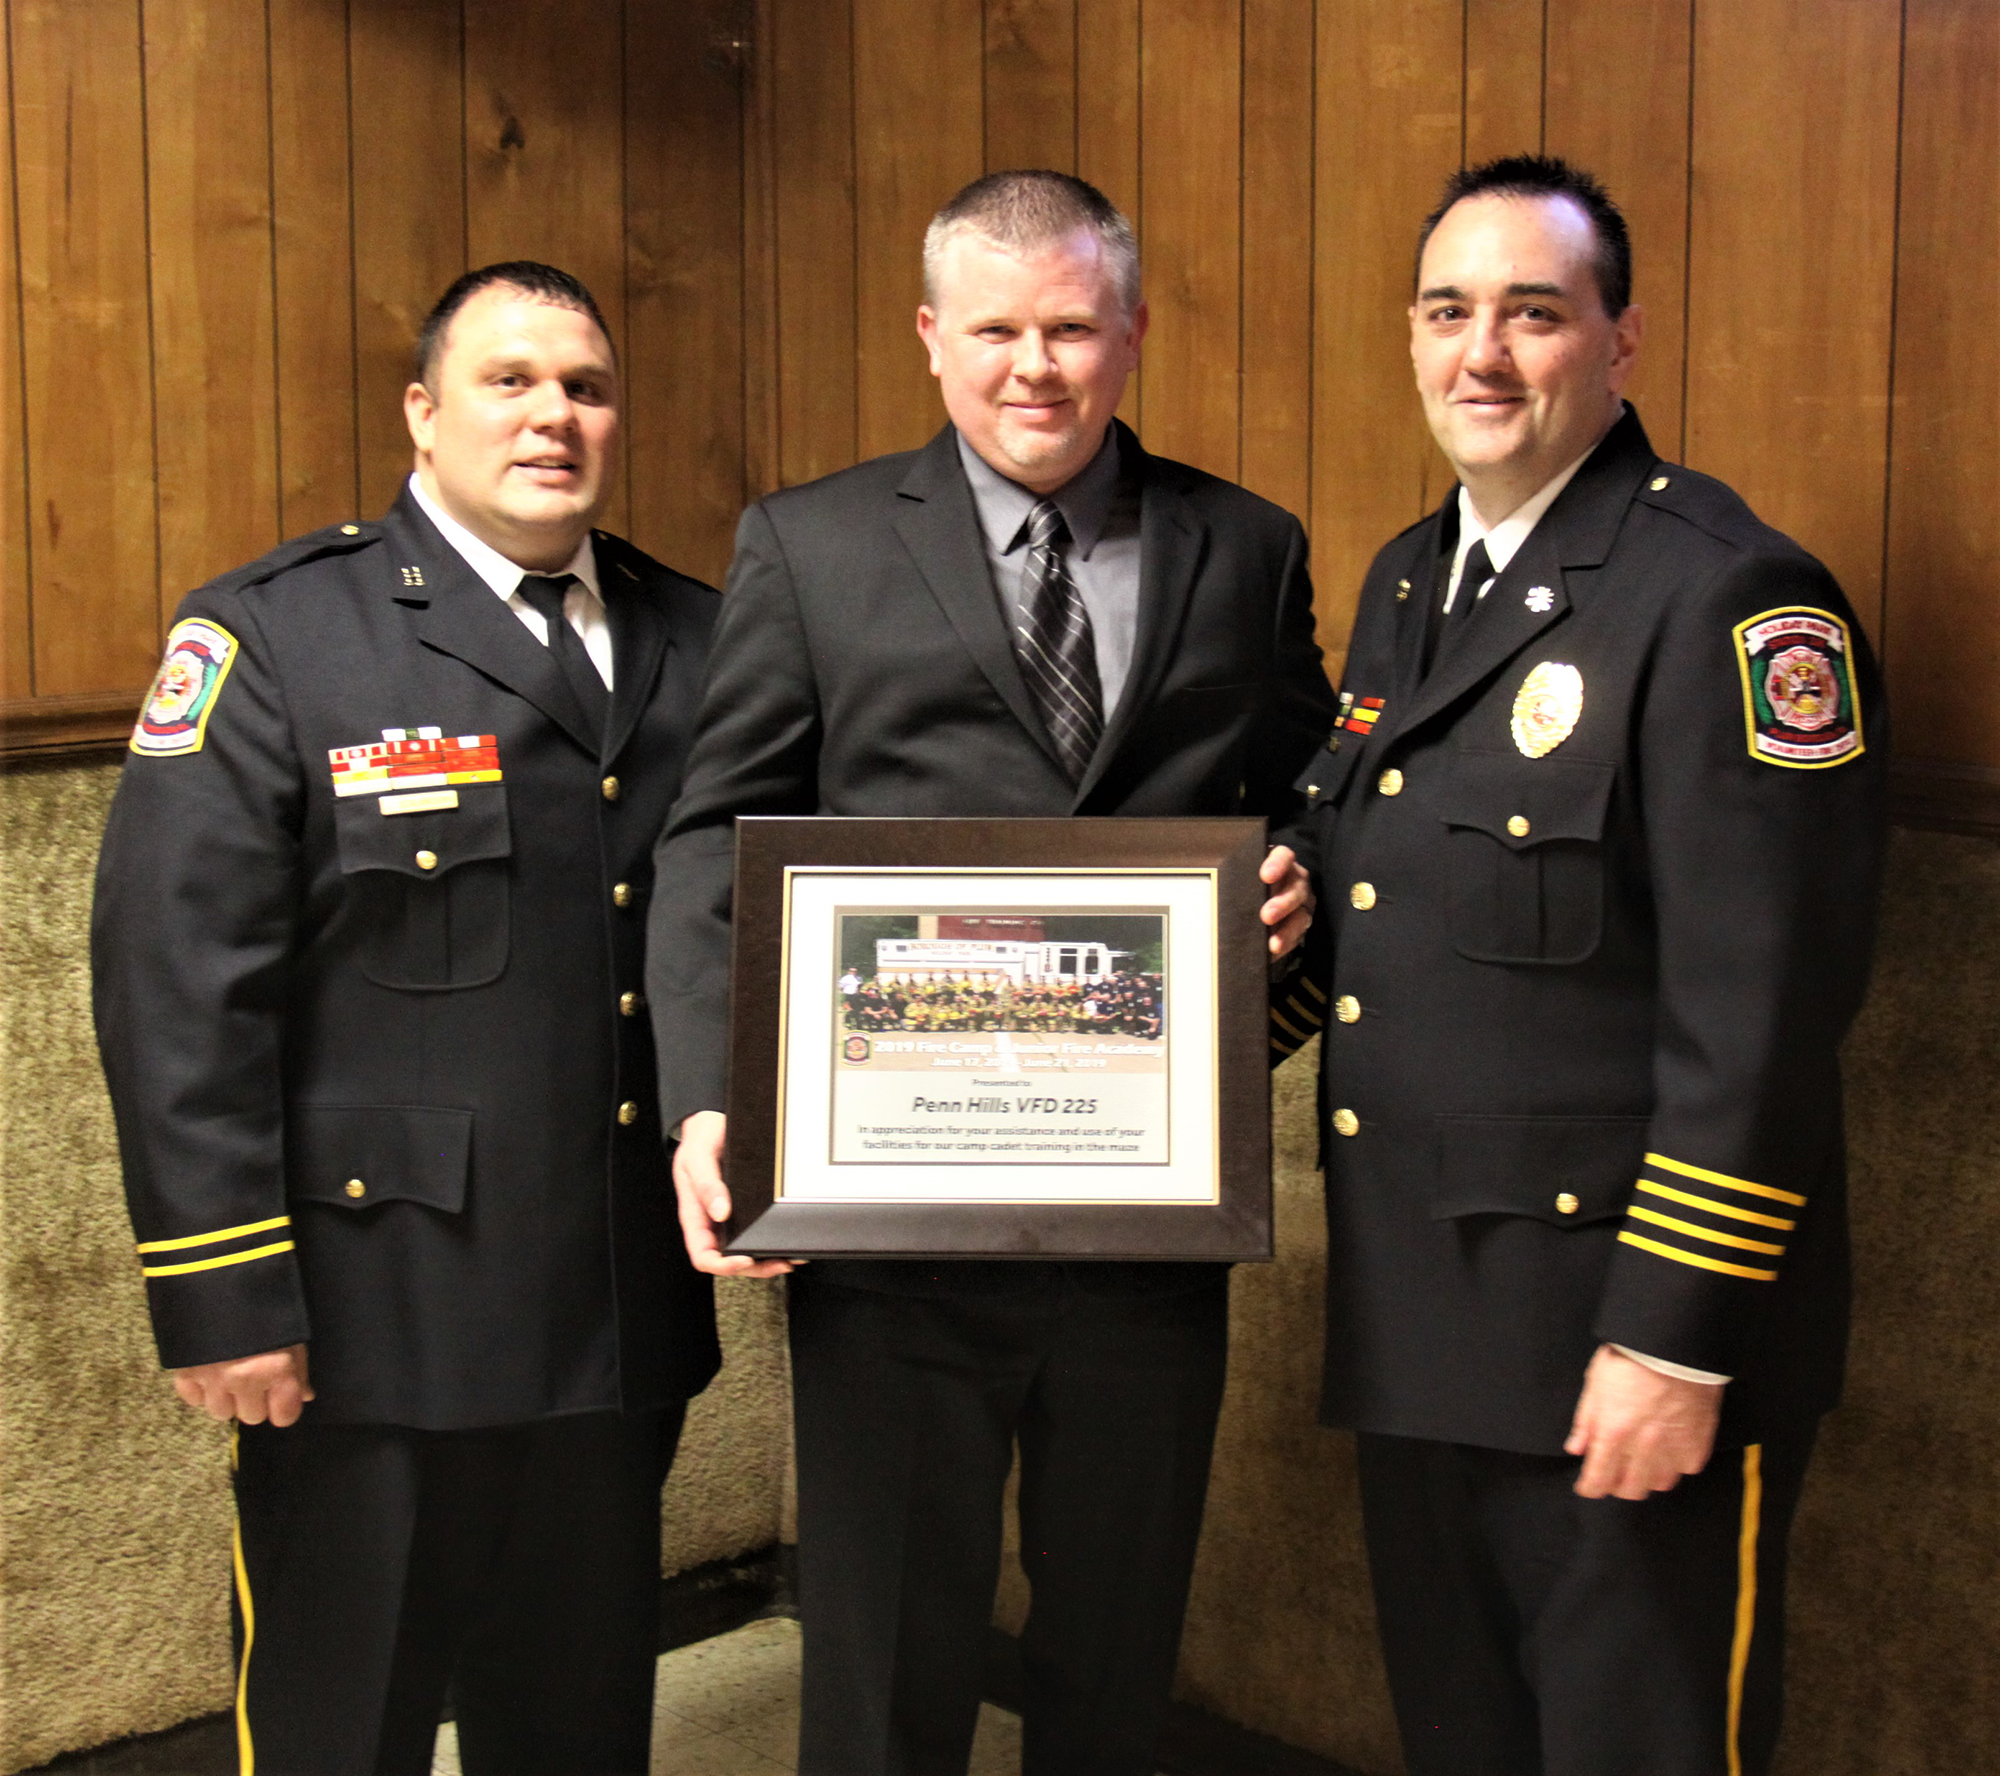 Special Awards to Fellow Emergency Agencies Holiday Park VFD